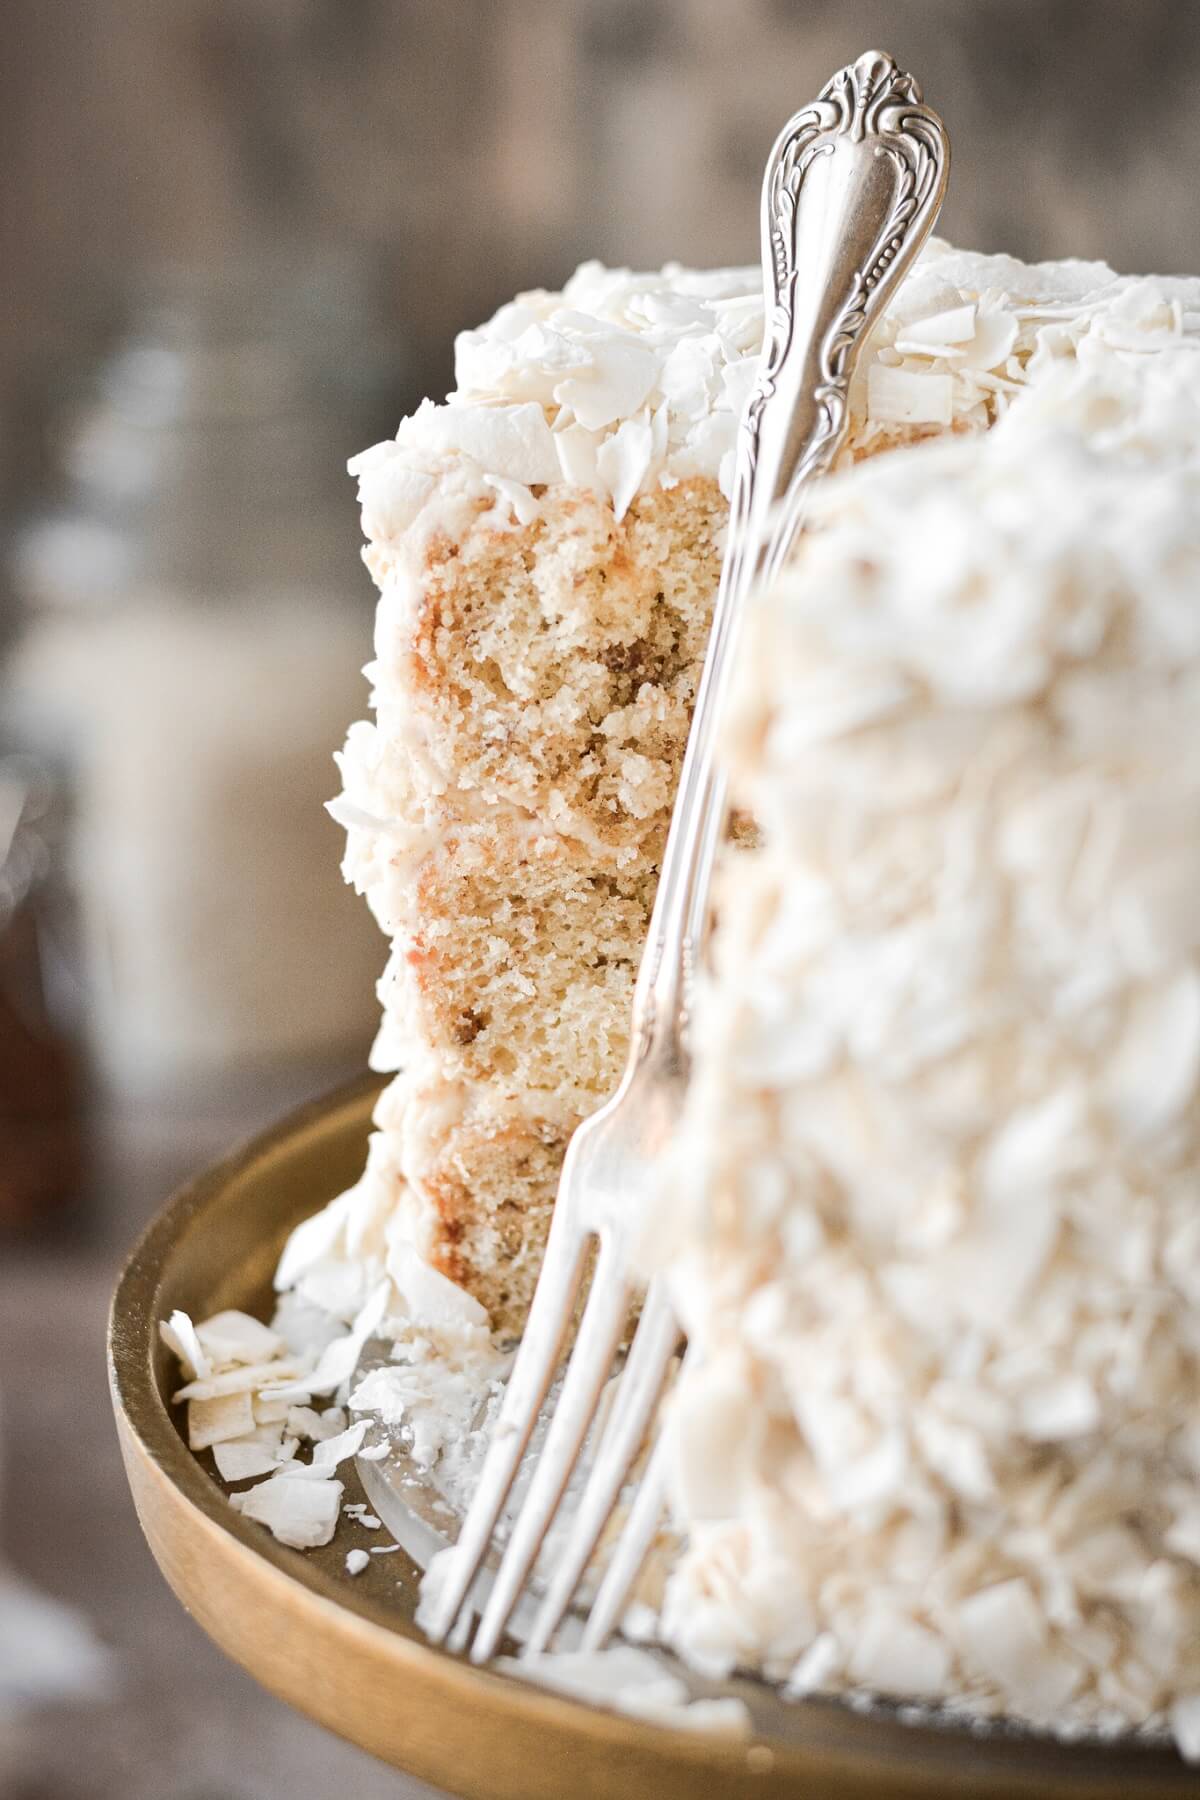 Italian cream cake with a fork resting against it.